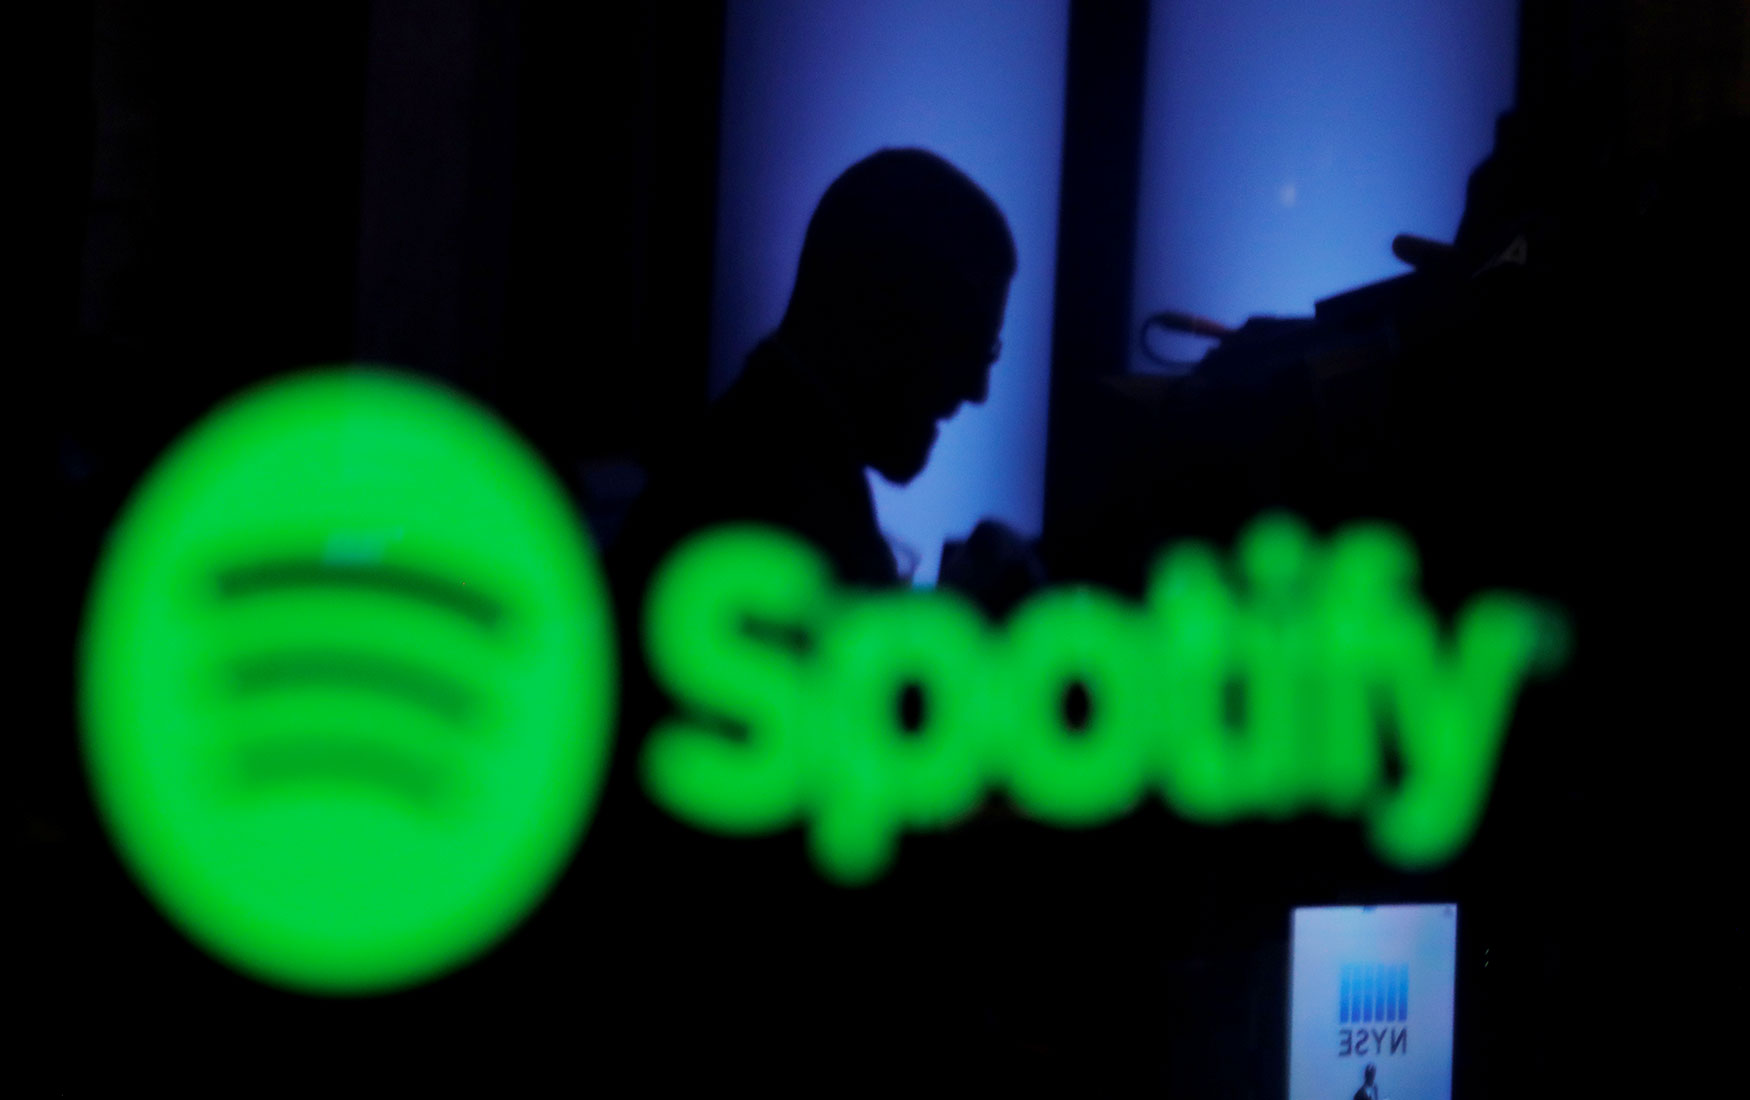     spotify  ipo 